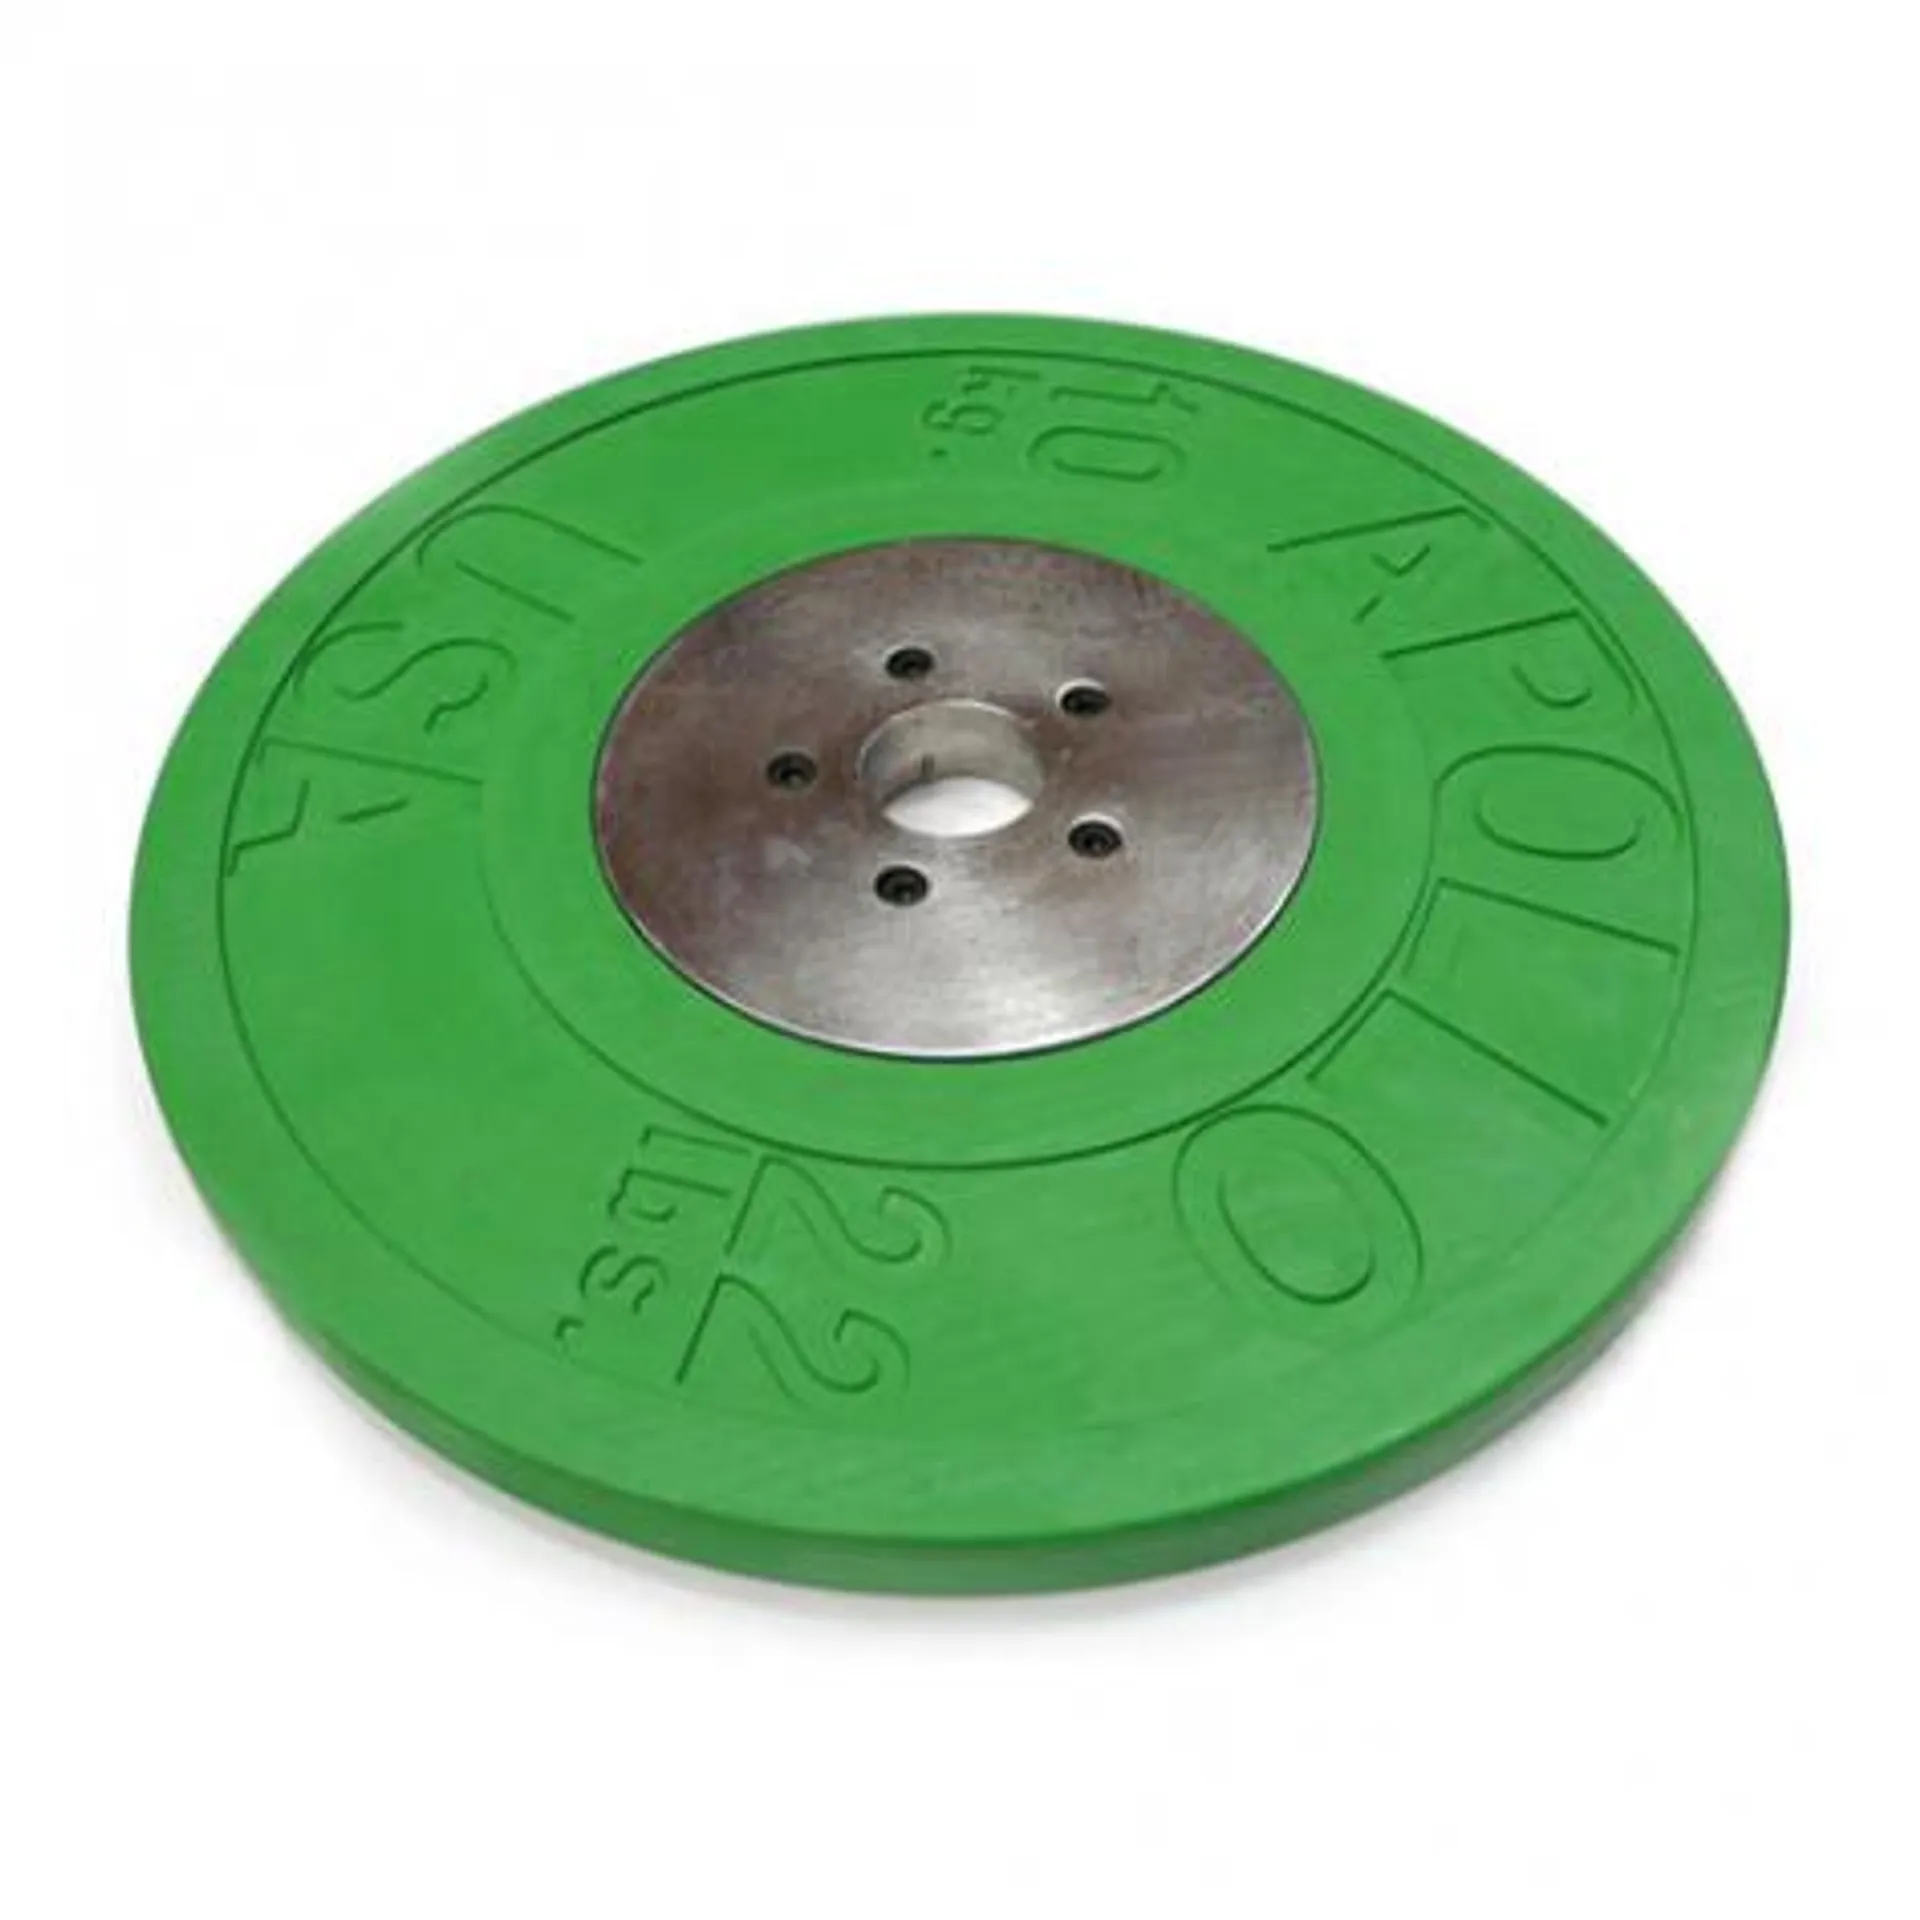 Body Power 10Kg Deluxe Rubber/Chrome Olympic Plates - Green (x2)